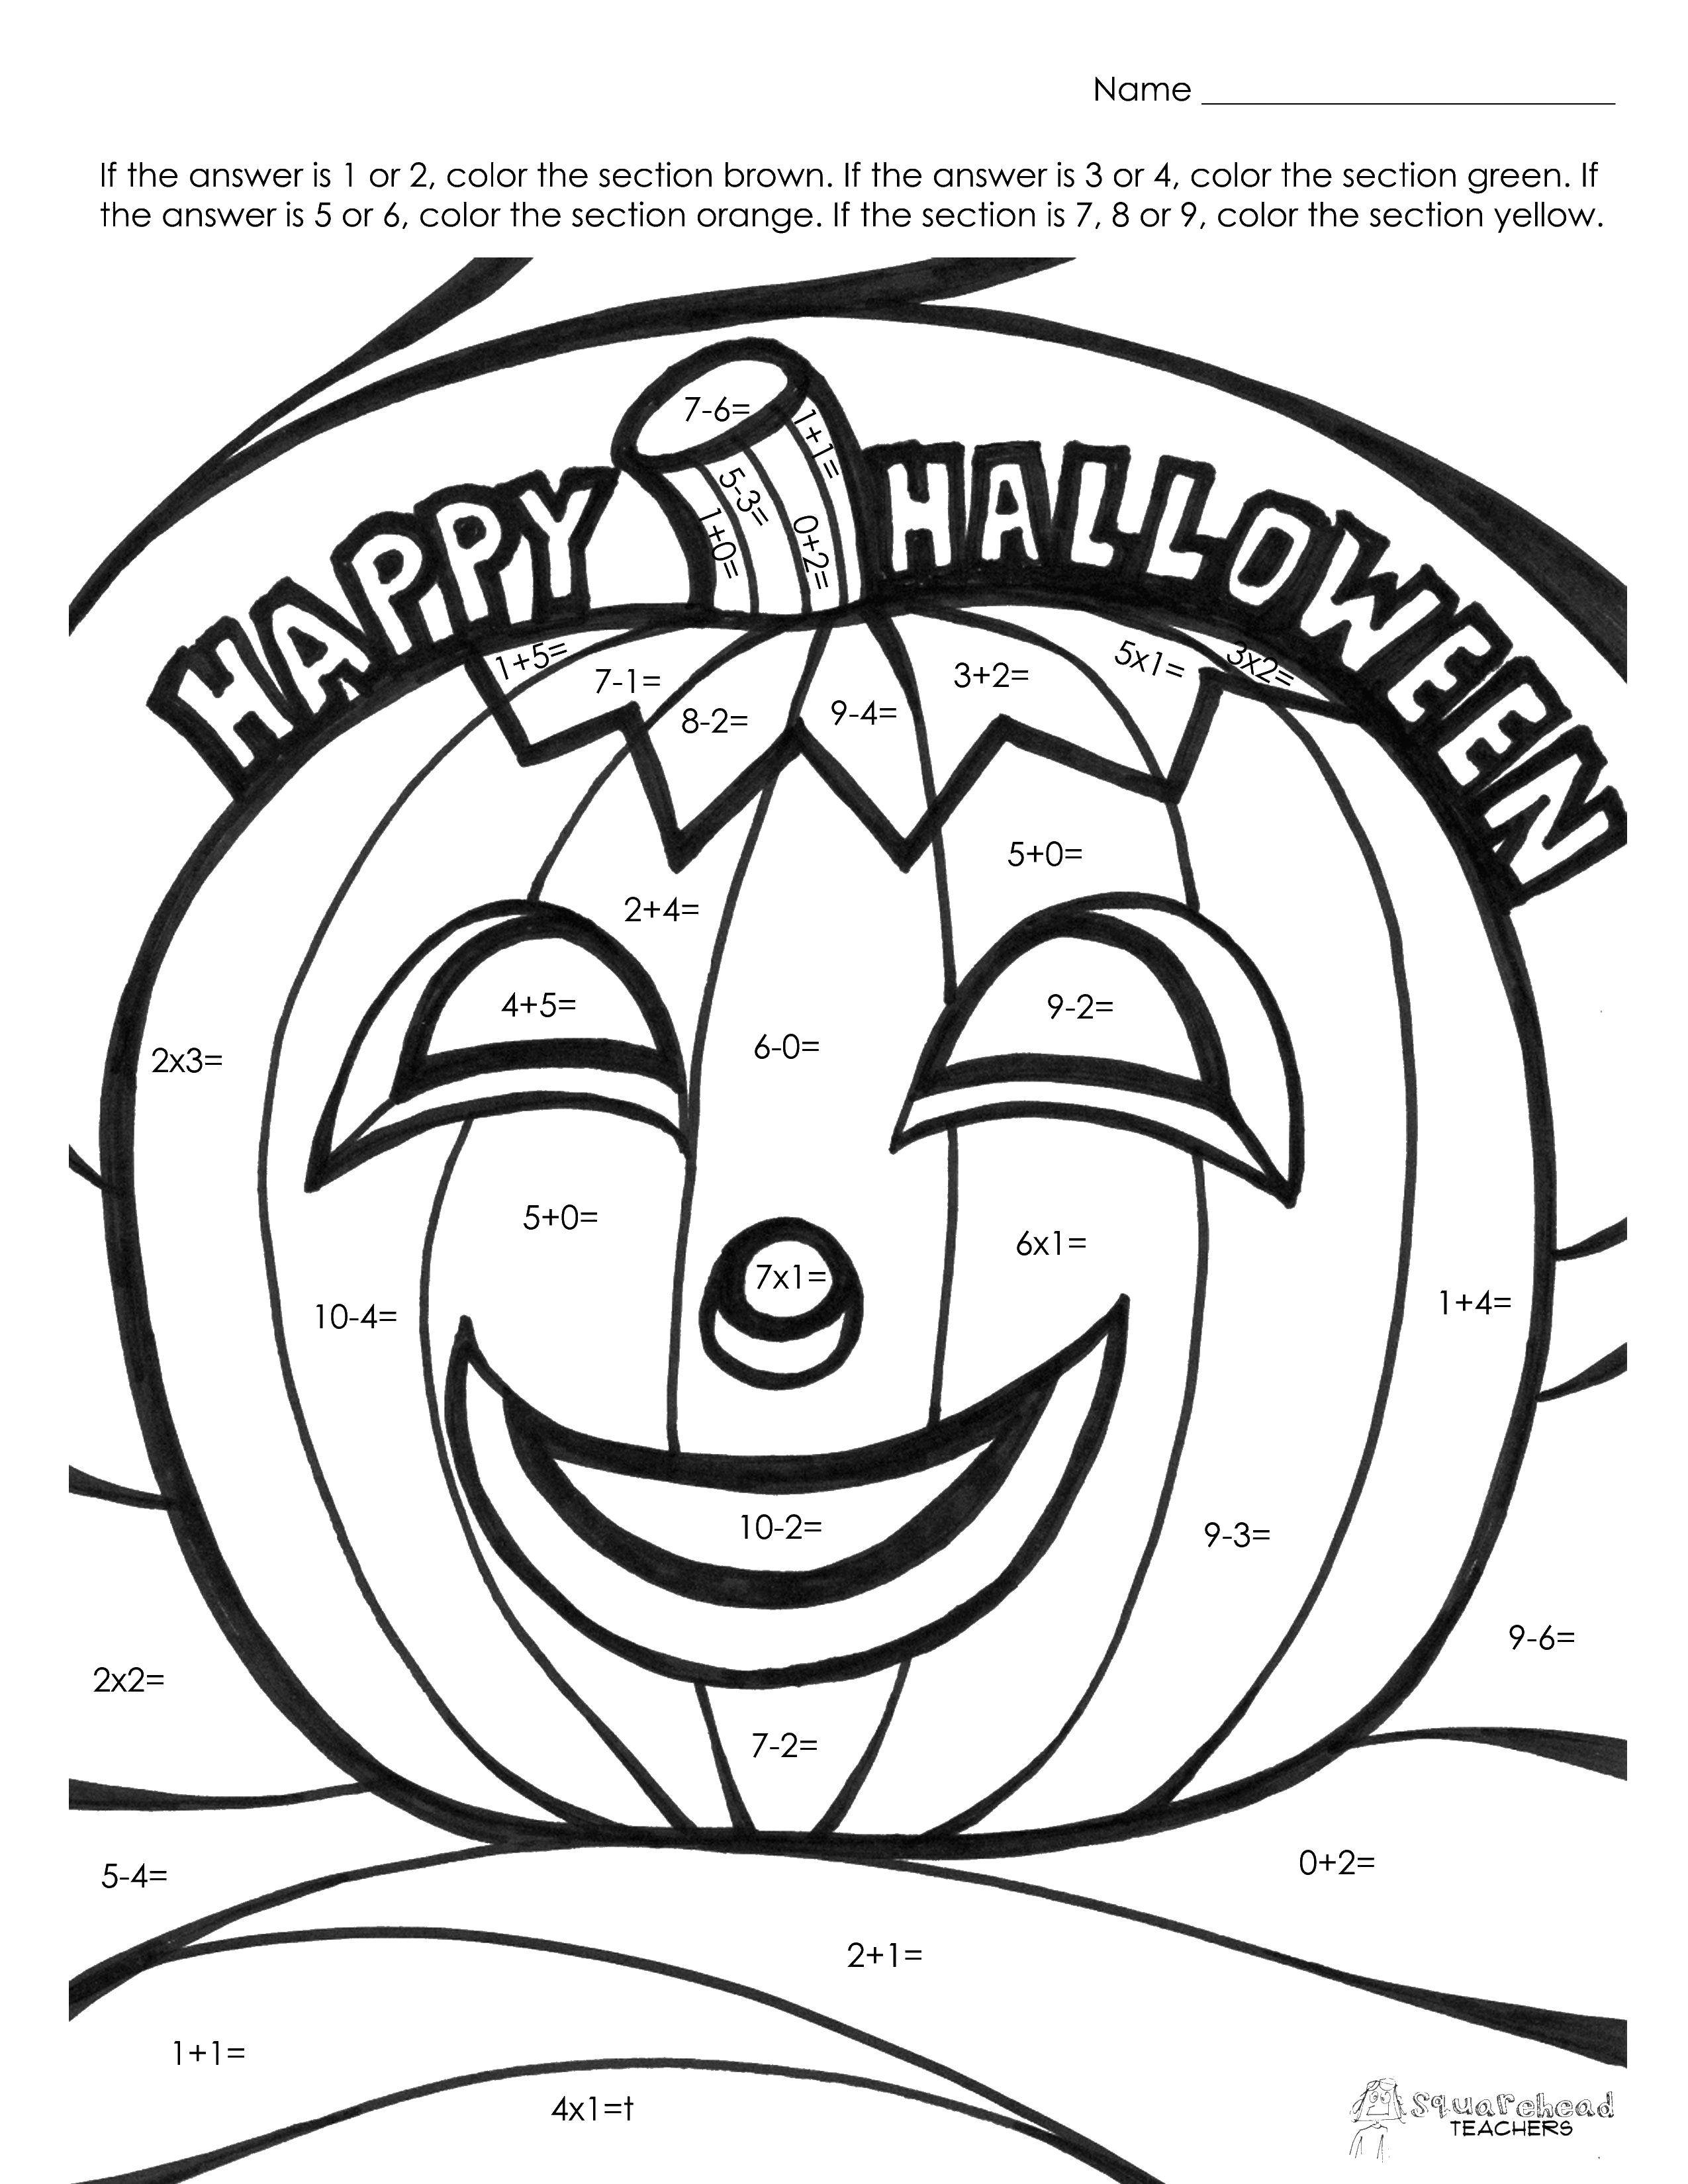 Coloring Solve examples and paint a pumpkin. Category Coloring pages. Tags:  Math, counting, logic.